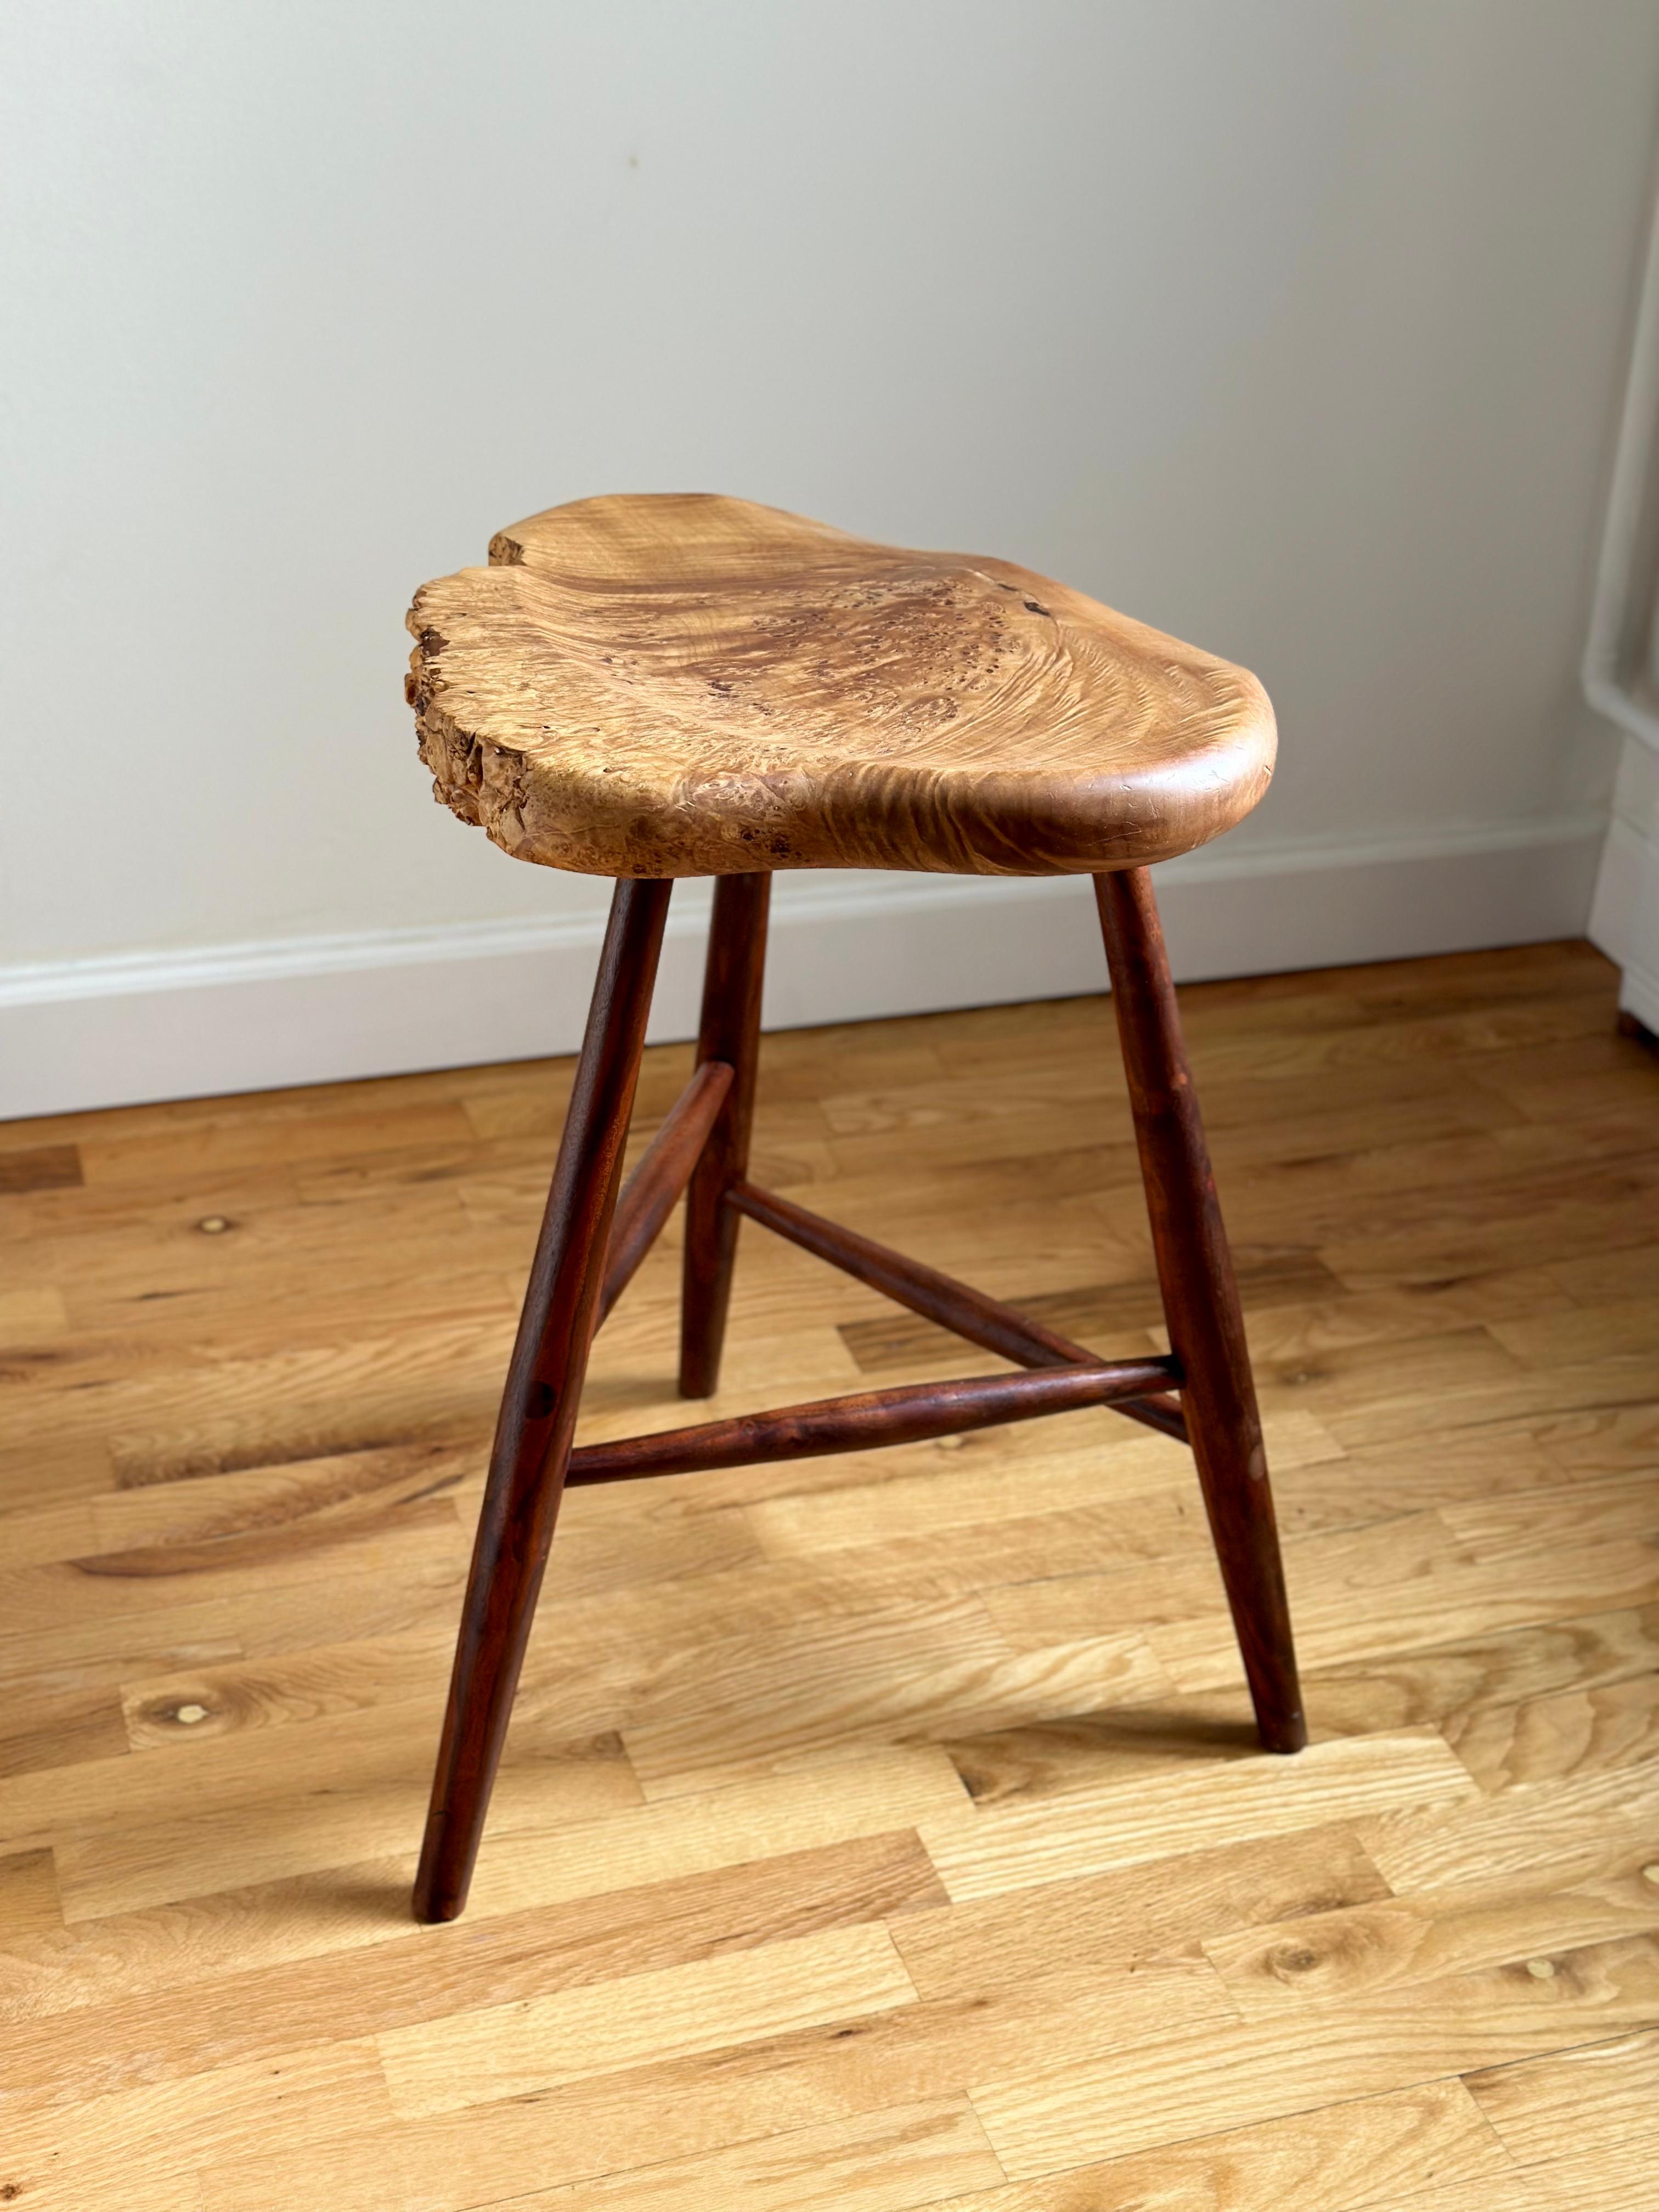 American Studio Live Edge Stool in Walnut and Maple Burl by Michael Elkan (American Arts and Crafts) im Angebot